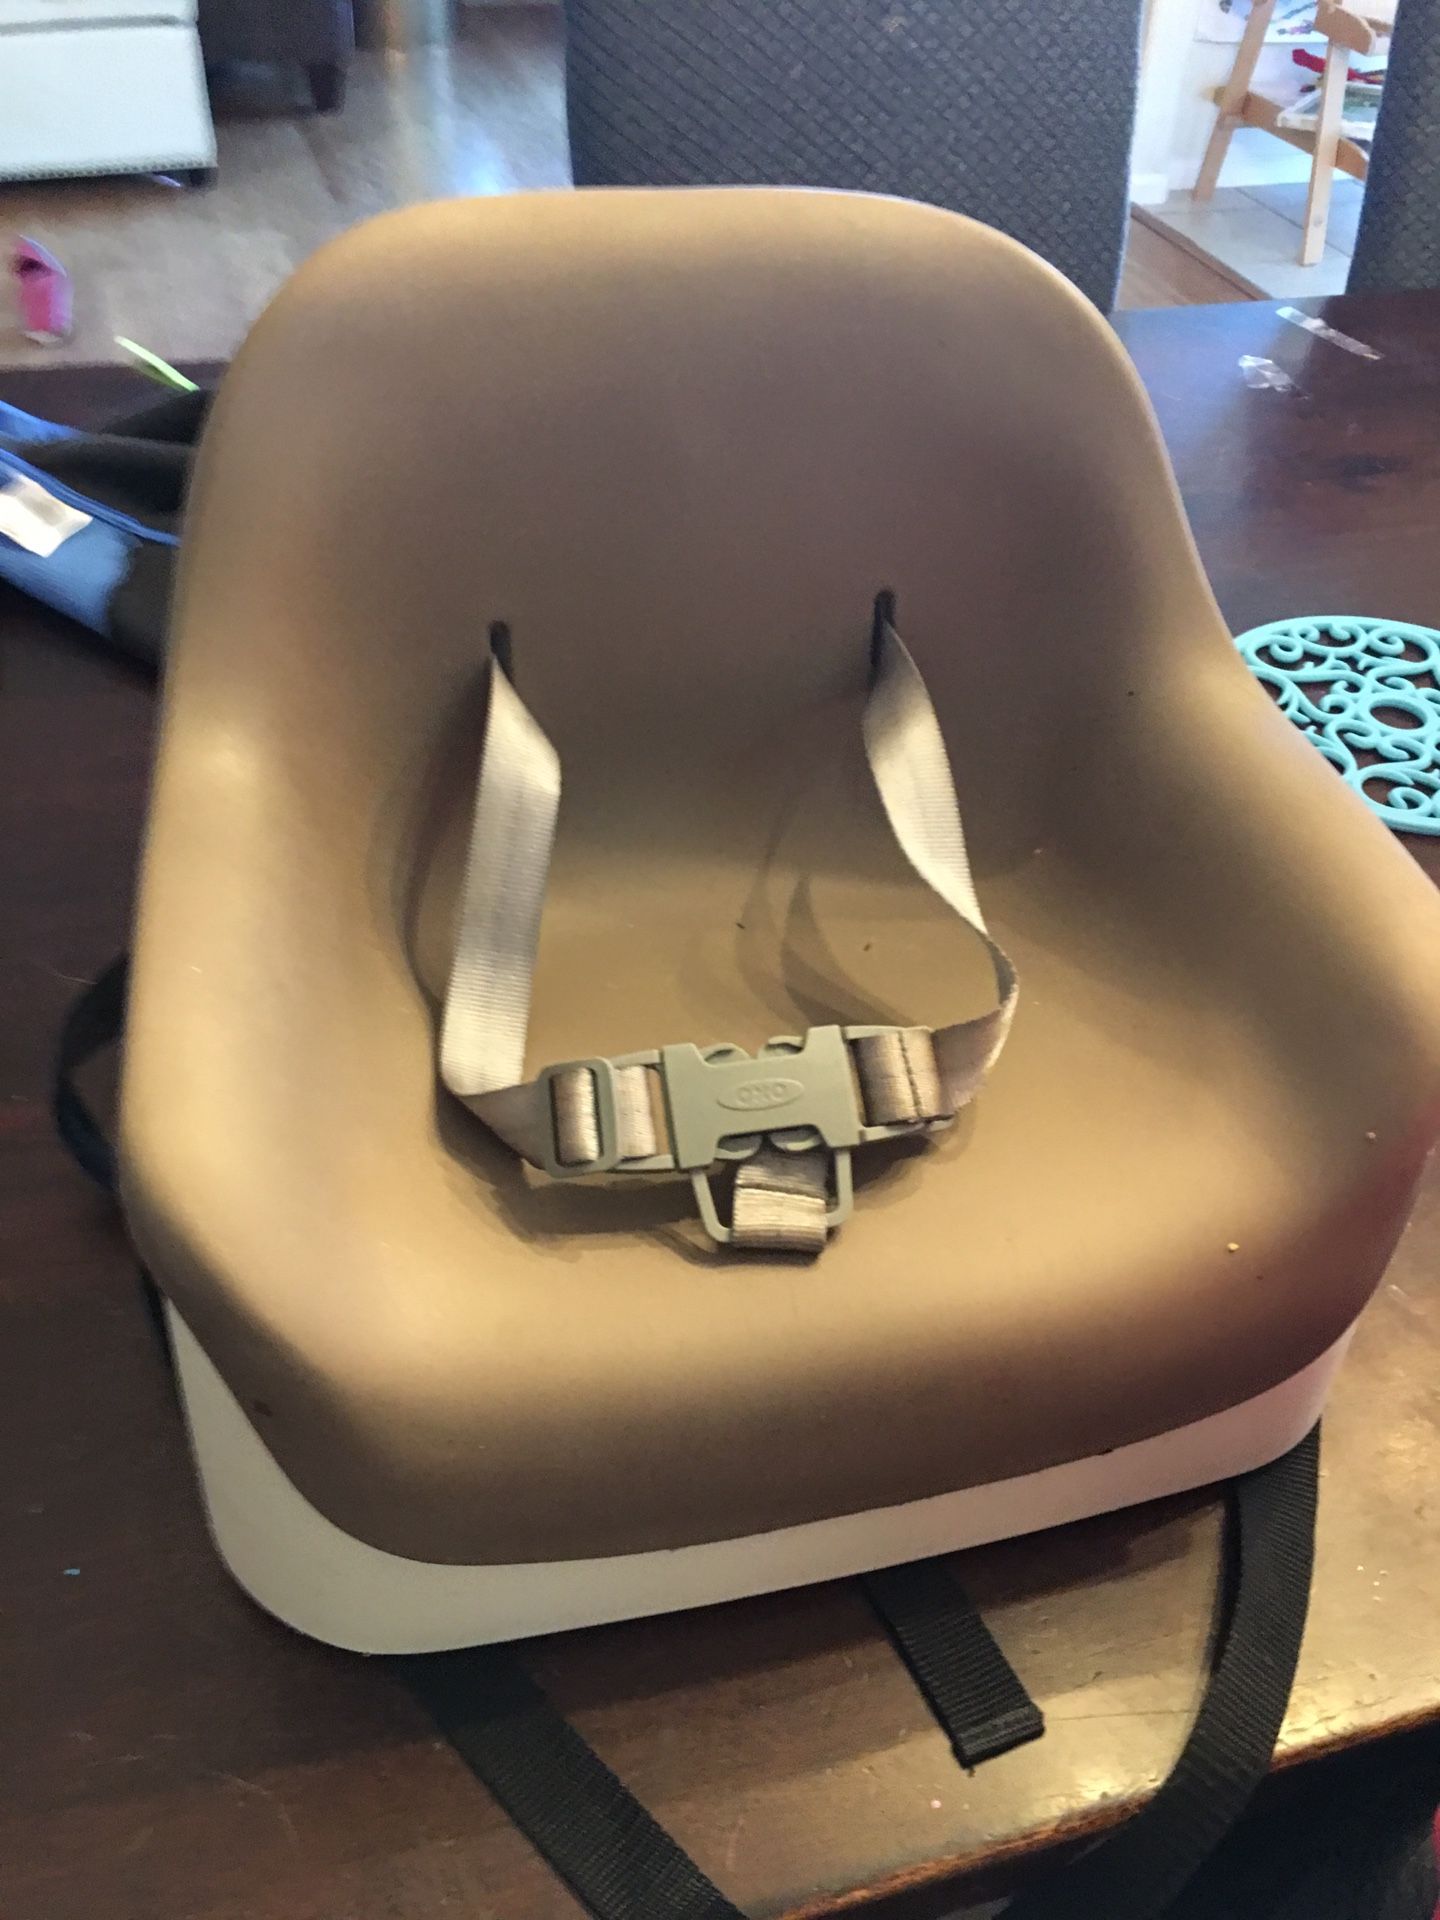 OXO booster seat